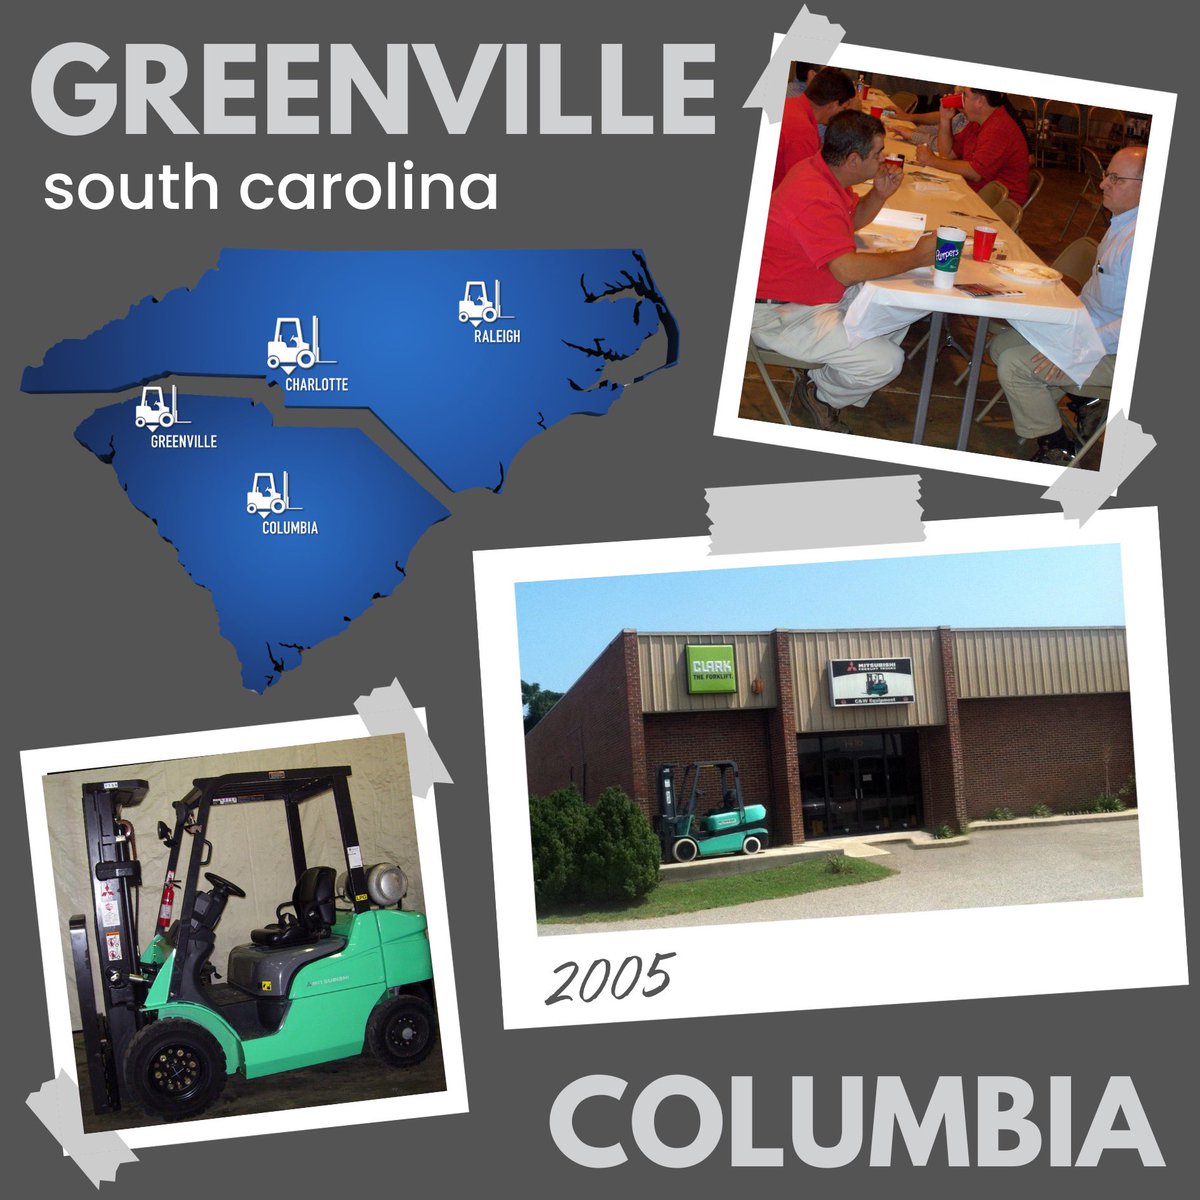 The expansion continued as we expanded into South Carolina in 2005. With offices and operations now in Greenville and Columbia, we were thrilled to make our foray into a new state and new territories.
 
#GWEquipment #Forklifts #MaterialHandling #60Anniversary #6Decades